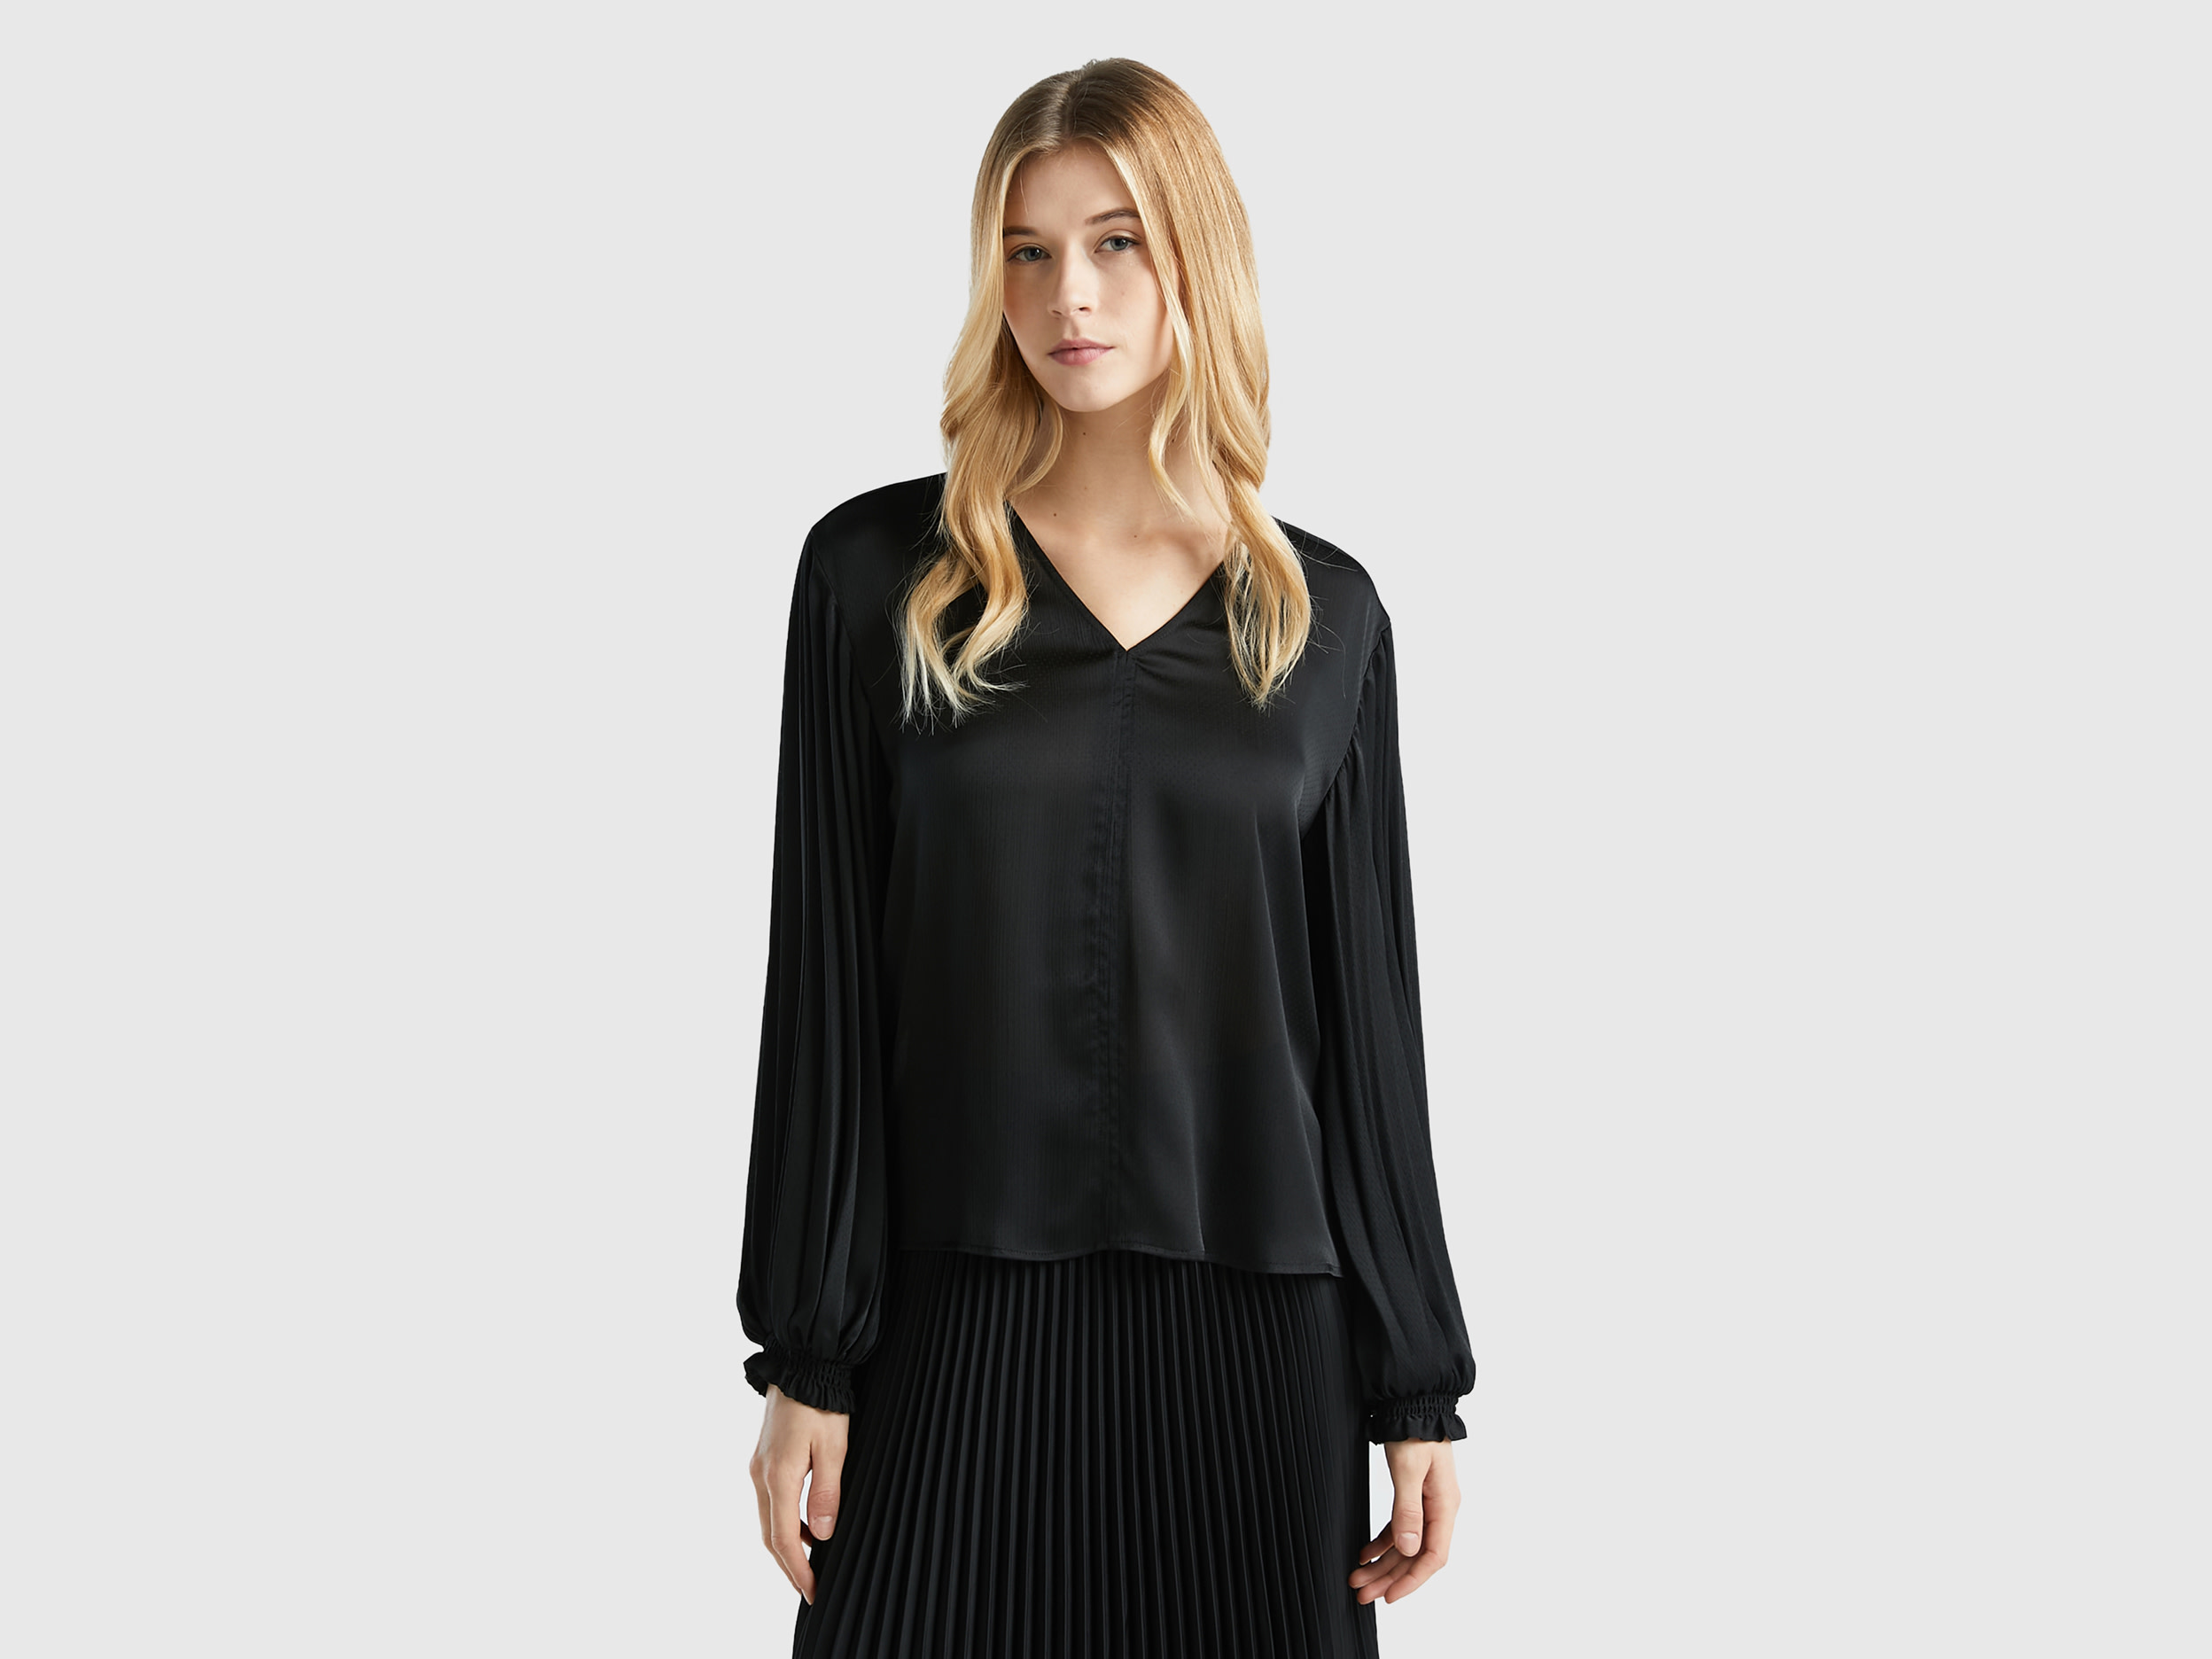 Benetton, Blouse With Long Pleated Sleeves, size L, Black, Women